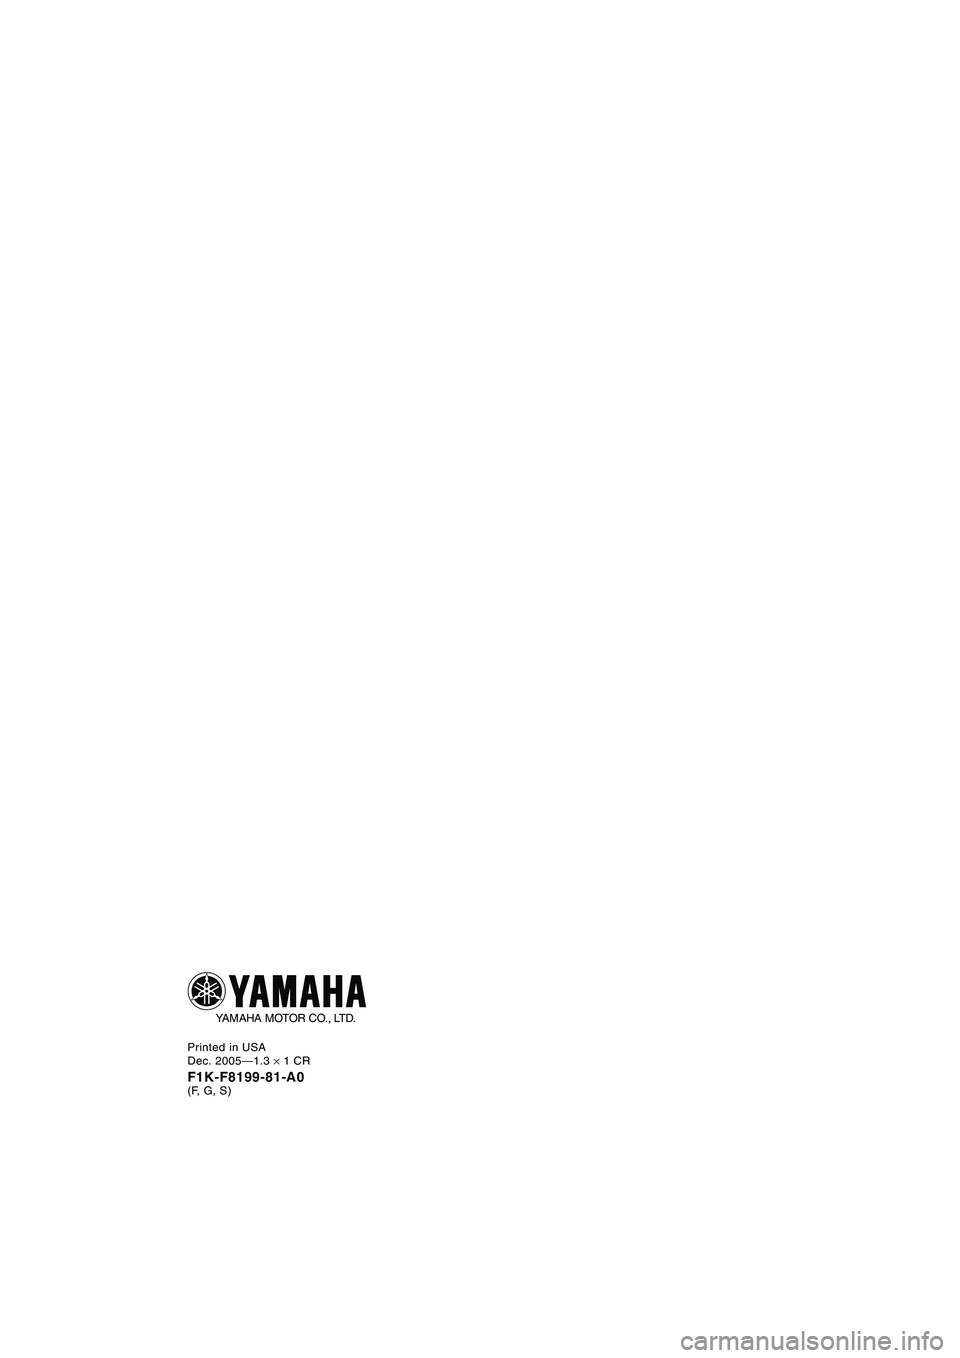 YAMAHA VX SPORT 2006  Manuale de Empleo (in Spanish) Printed in USA
Dec. 2005—1.3 × 1 CR
F1K-F8199-81-A0(F, G, S)
YAMAHA MOTOR CO., LTD.
A_F1K80.book  Page 1  Monday, October 24, 2005  3:49 PM 